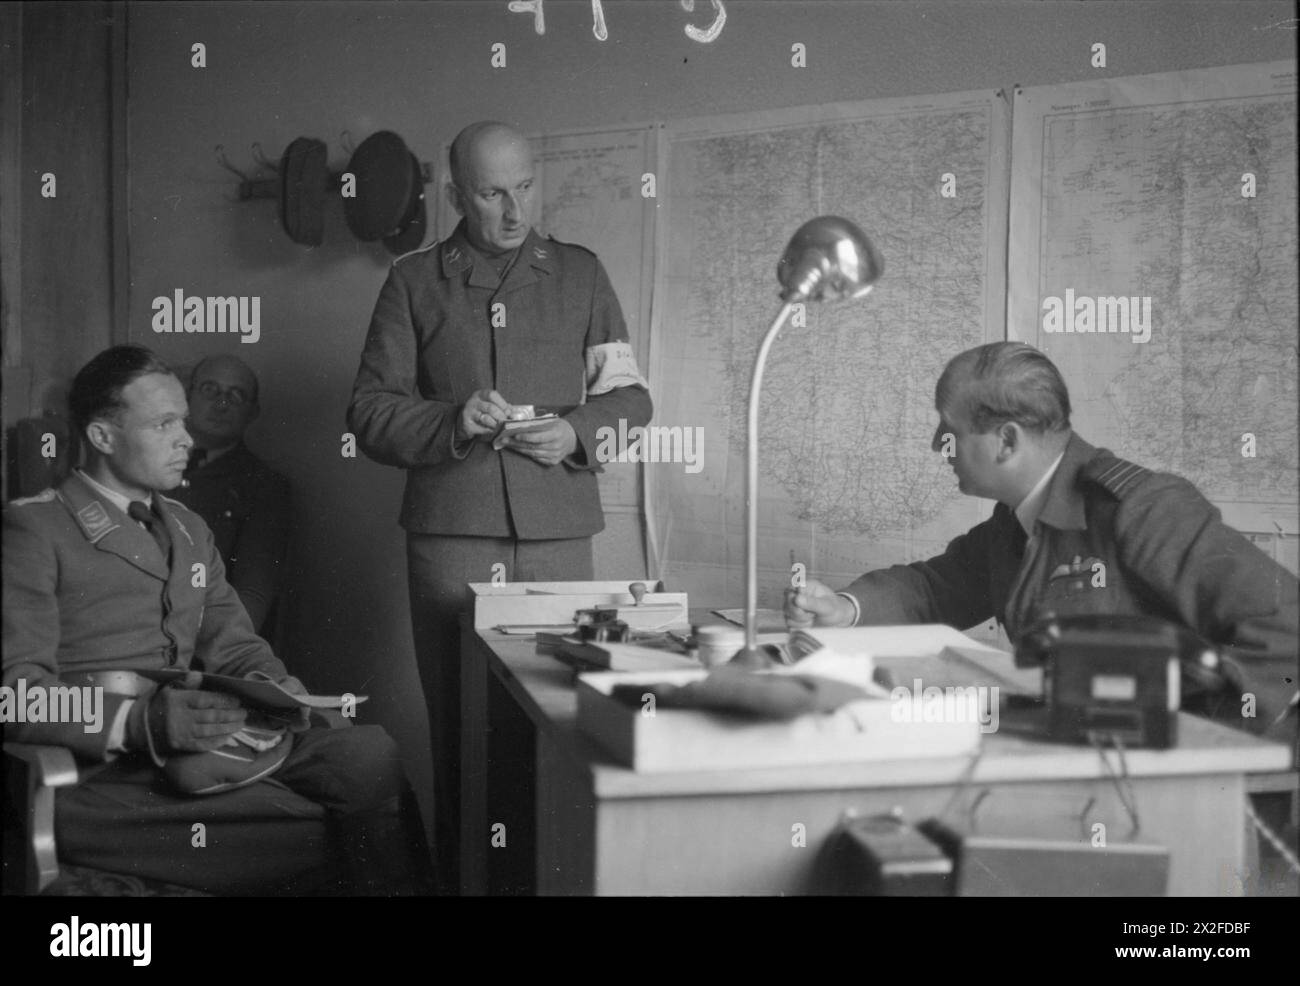 ROYAL AIR FORCE: BRITISH AIR FORCES OF OCCUPATION, 1945. - Wing Commander W W Russell (right), Commanding Officer of an RAF Disarmament Wing at Stavanger, Norway, conducts a morning conference with the Luftwaffe officer (left) in charge of prisoners who are disarming German aircraft at Sola airfield. A German interpreter stands in the middle taking notes and instructions Royal Air Force, British Air Forces of Occupation, German Air Force (Third Reich) Stock Photo